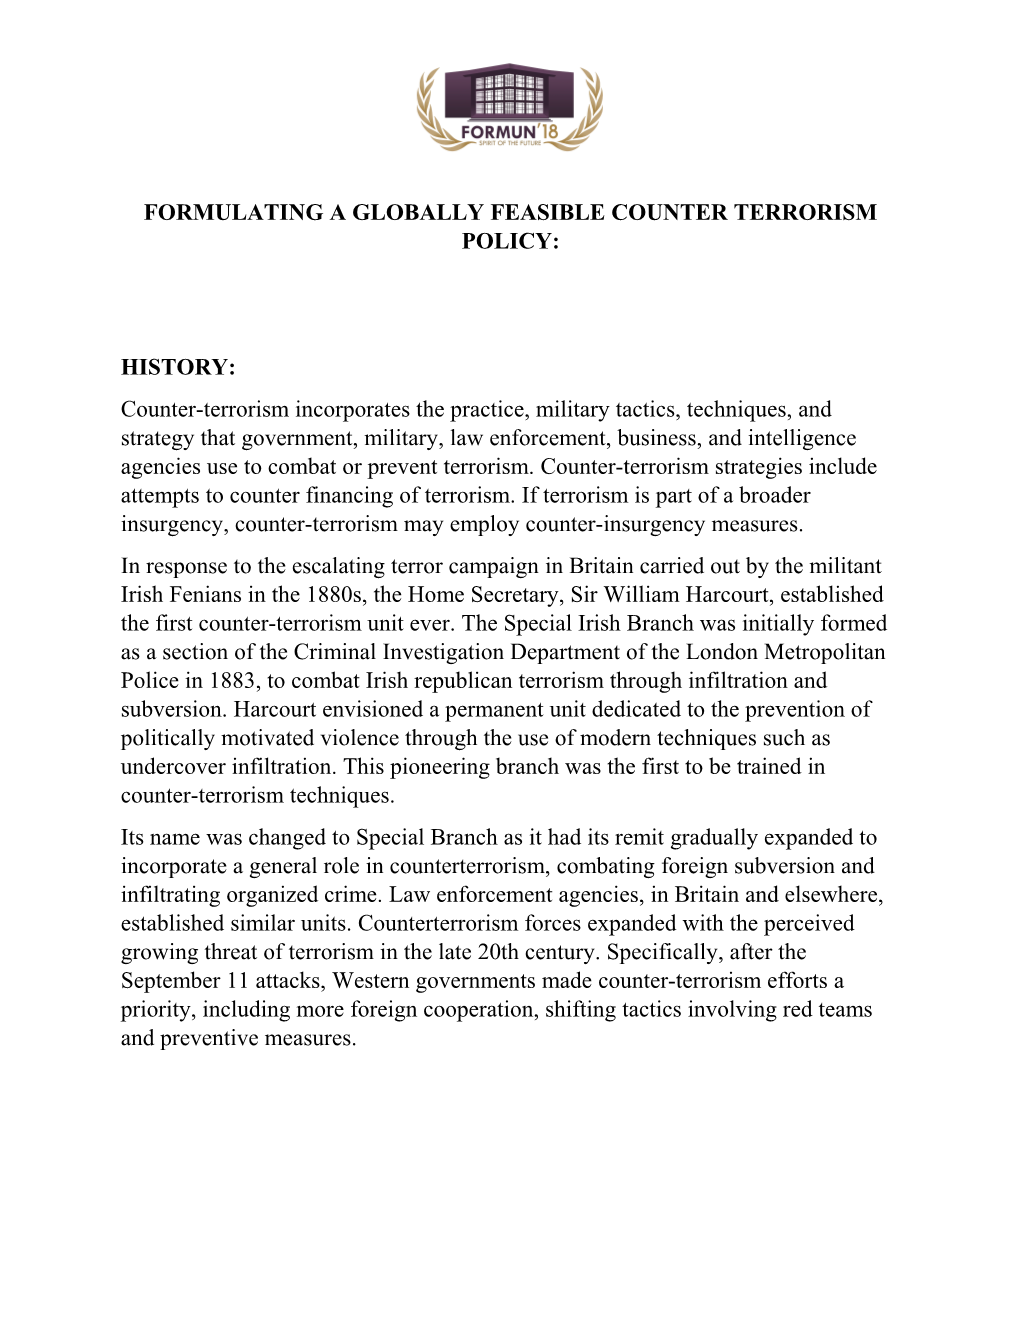 Formulating a Globally Feasible Counter Terrorism Policy